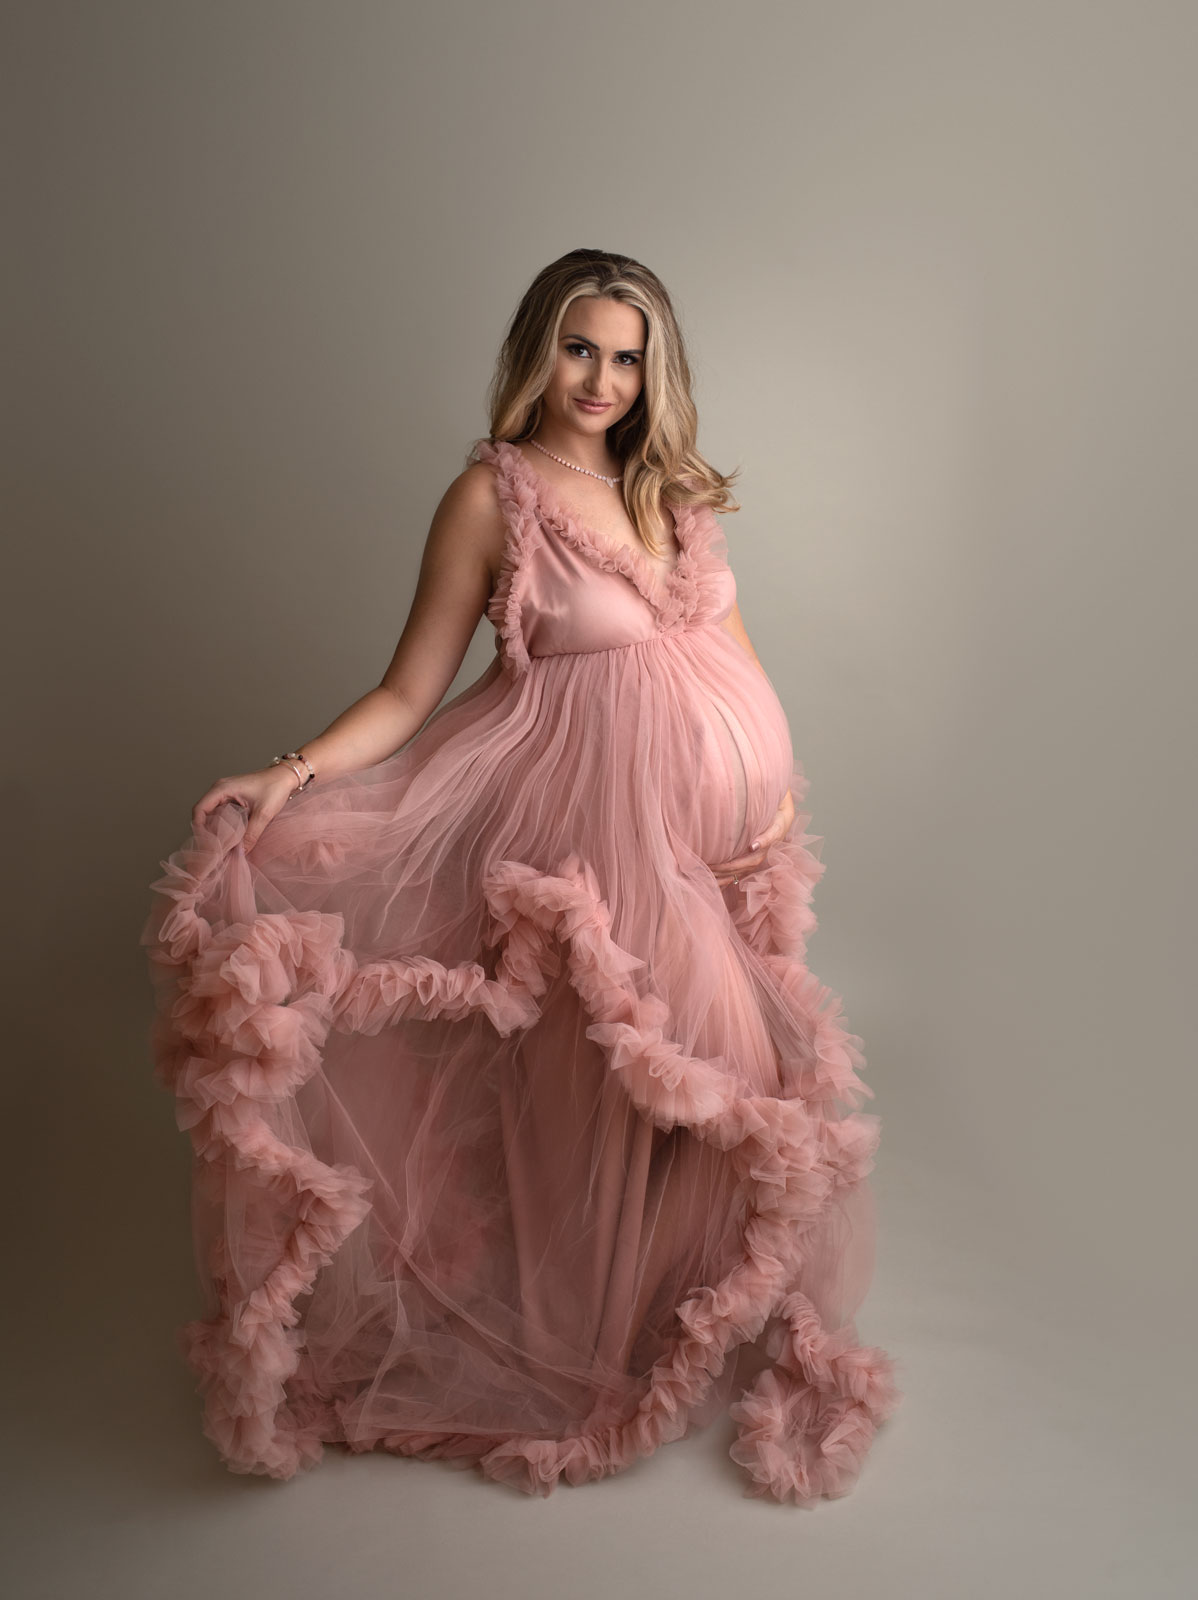 A mother to be stands in a pink maternity gown made of tule in a studio purple lotus doulas